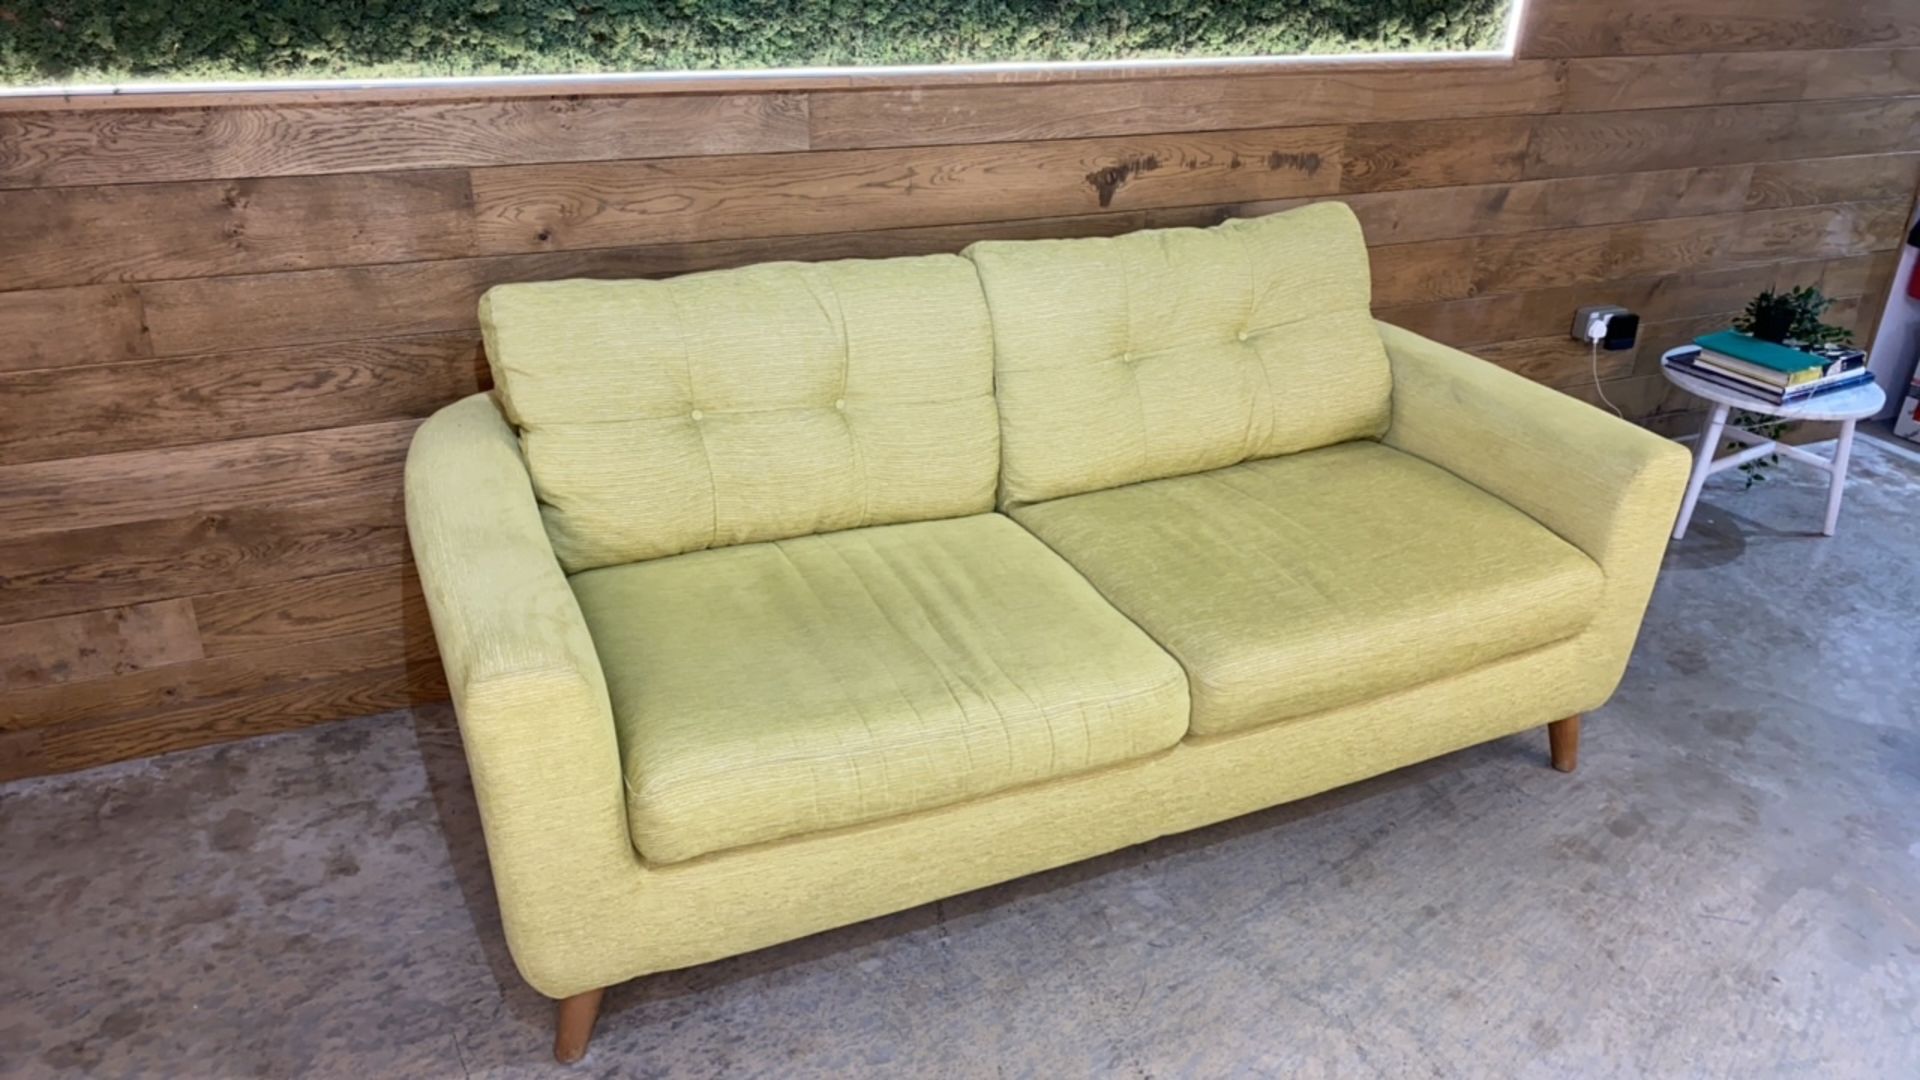 Two Seater Green Sofa - Image 4 of 5